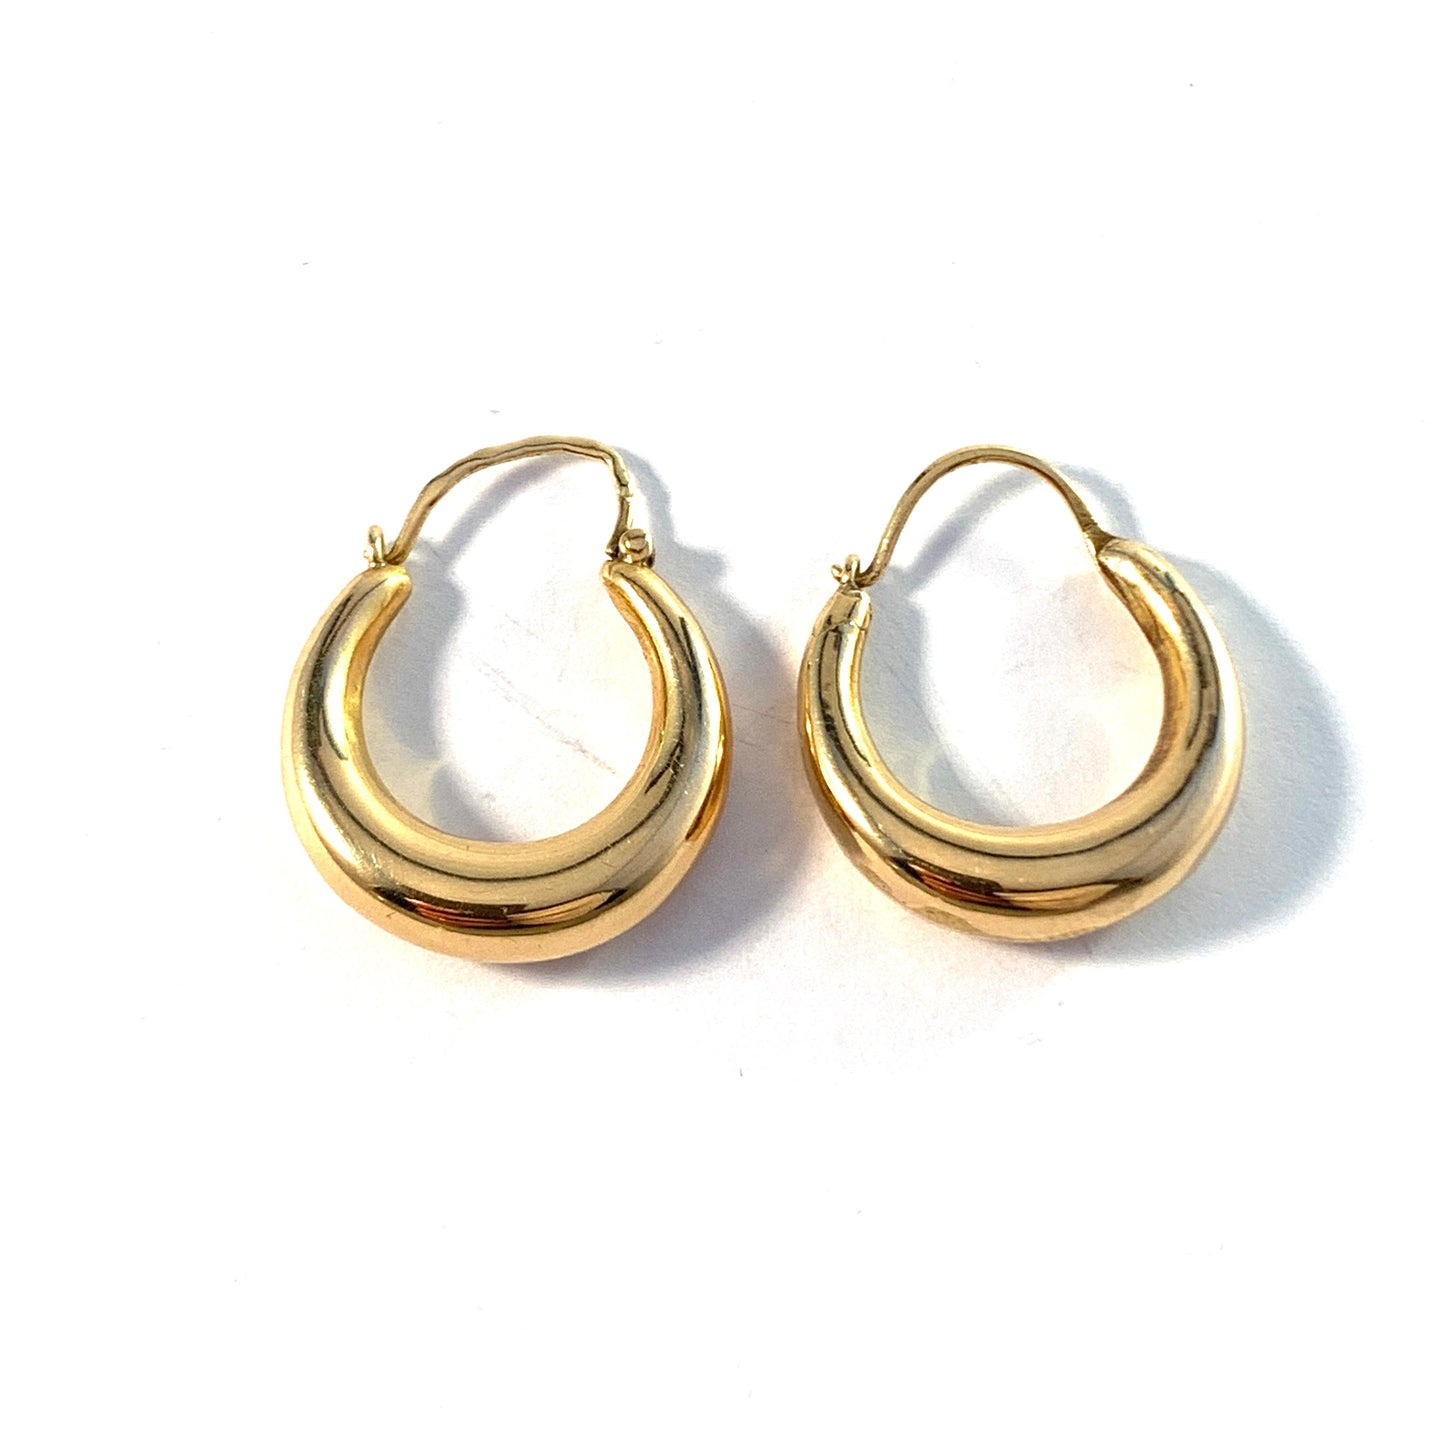 Sweden year 1897 and 1939. Two 18k Gold Earrings. Similar Design.